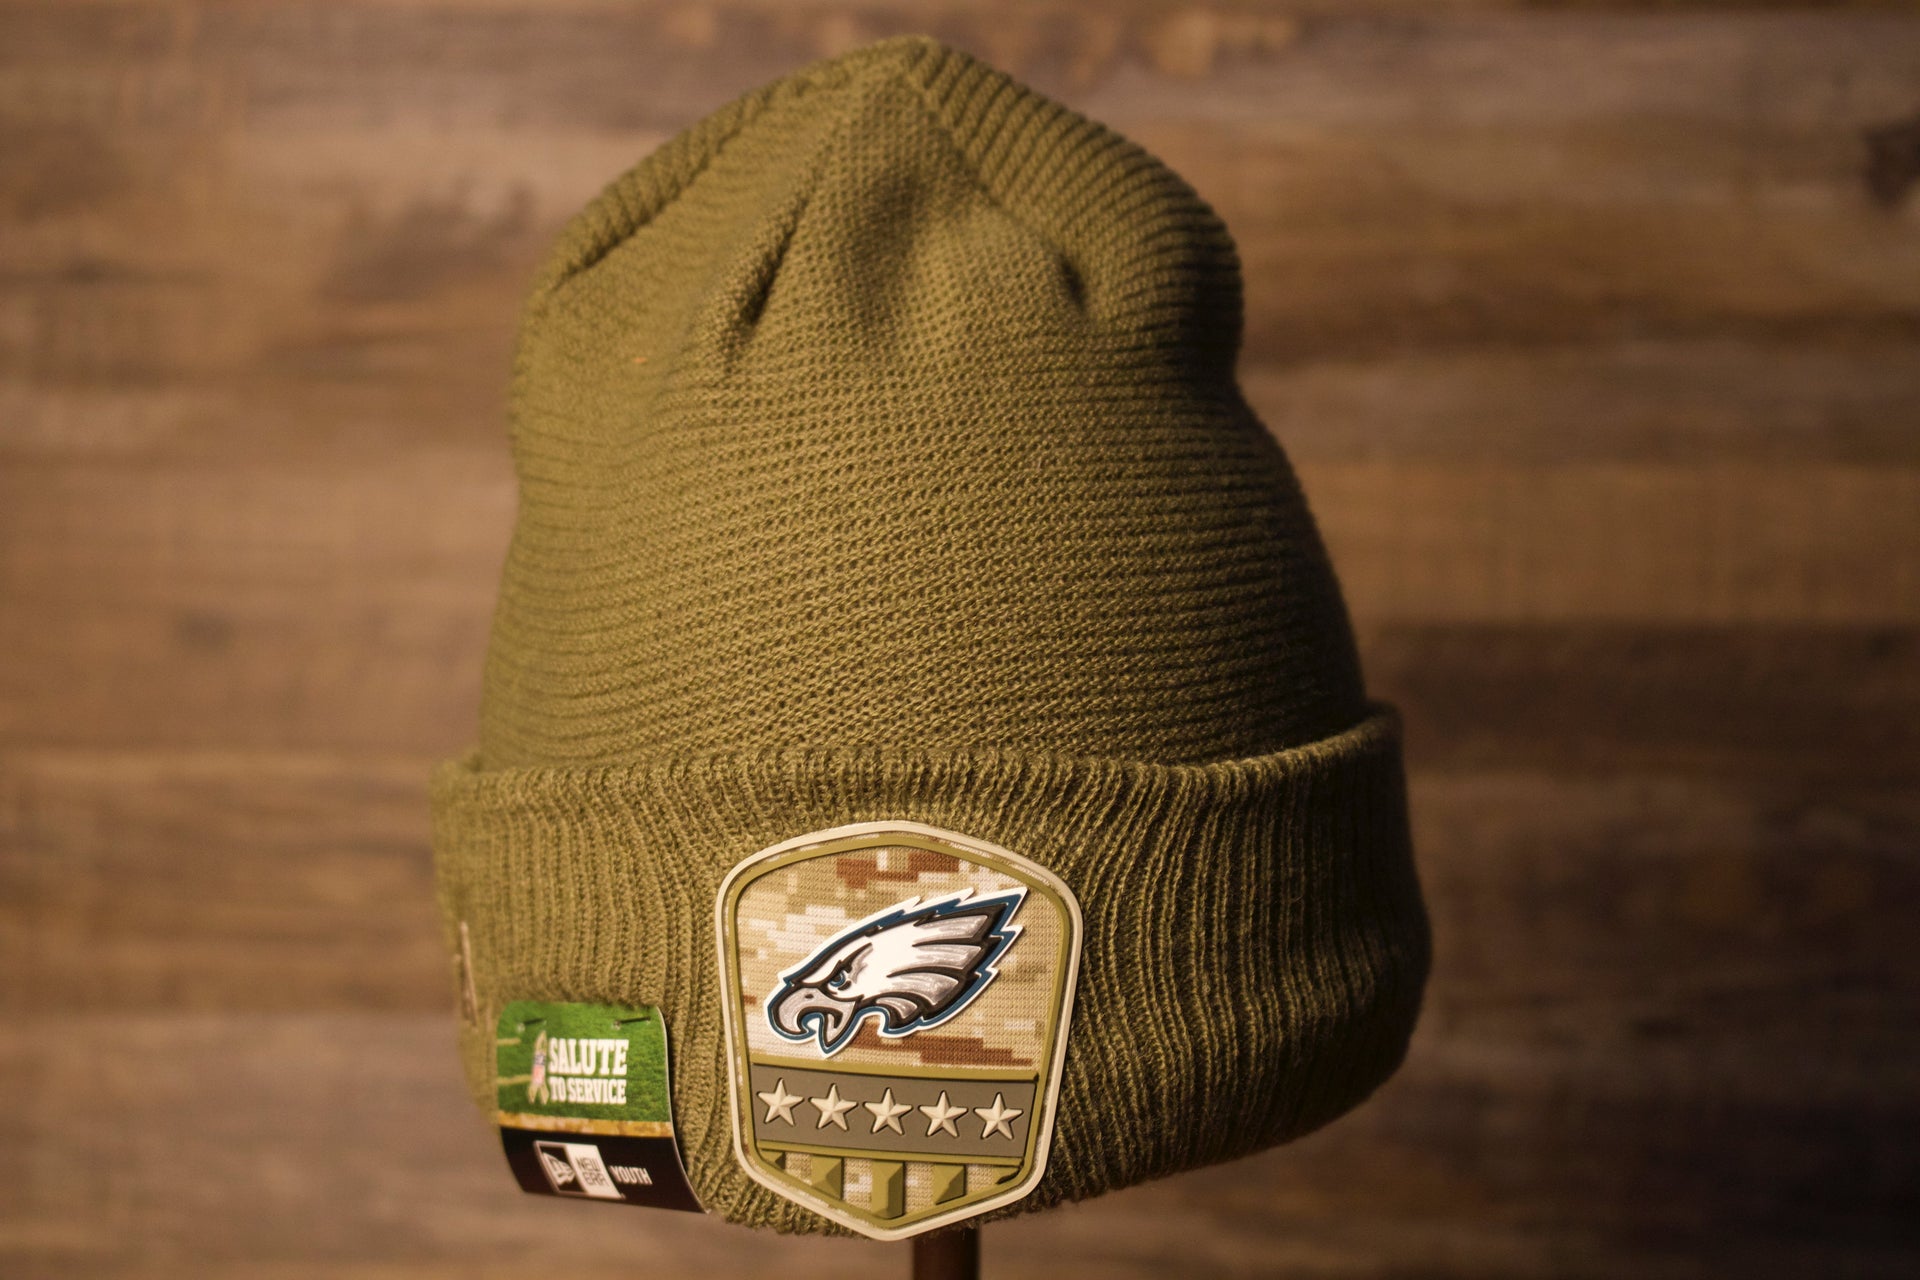 Eagles Youth Beanie | Philadelphia Eagles 2019 Salute To Service Beanie this eagles salute beanie is nothing on the top but the Eagles logo in a shield type of design on the front cuff